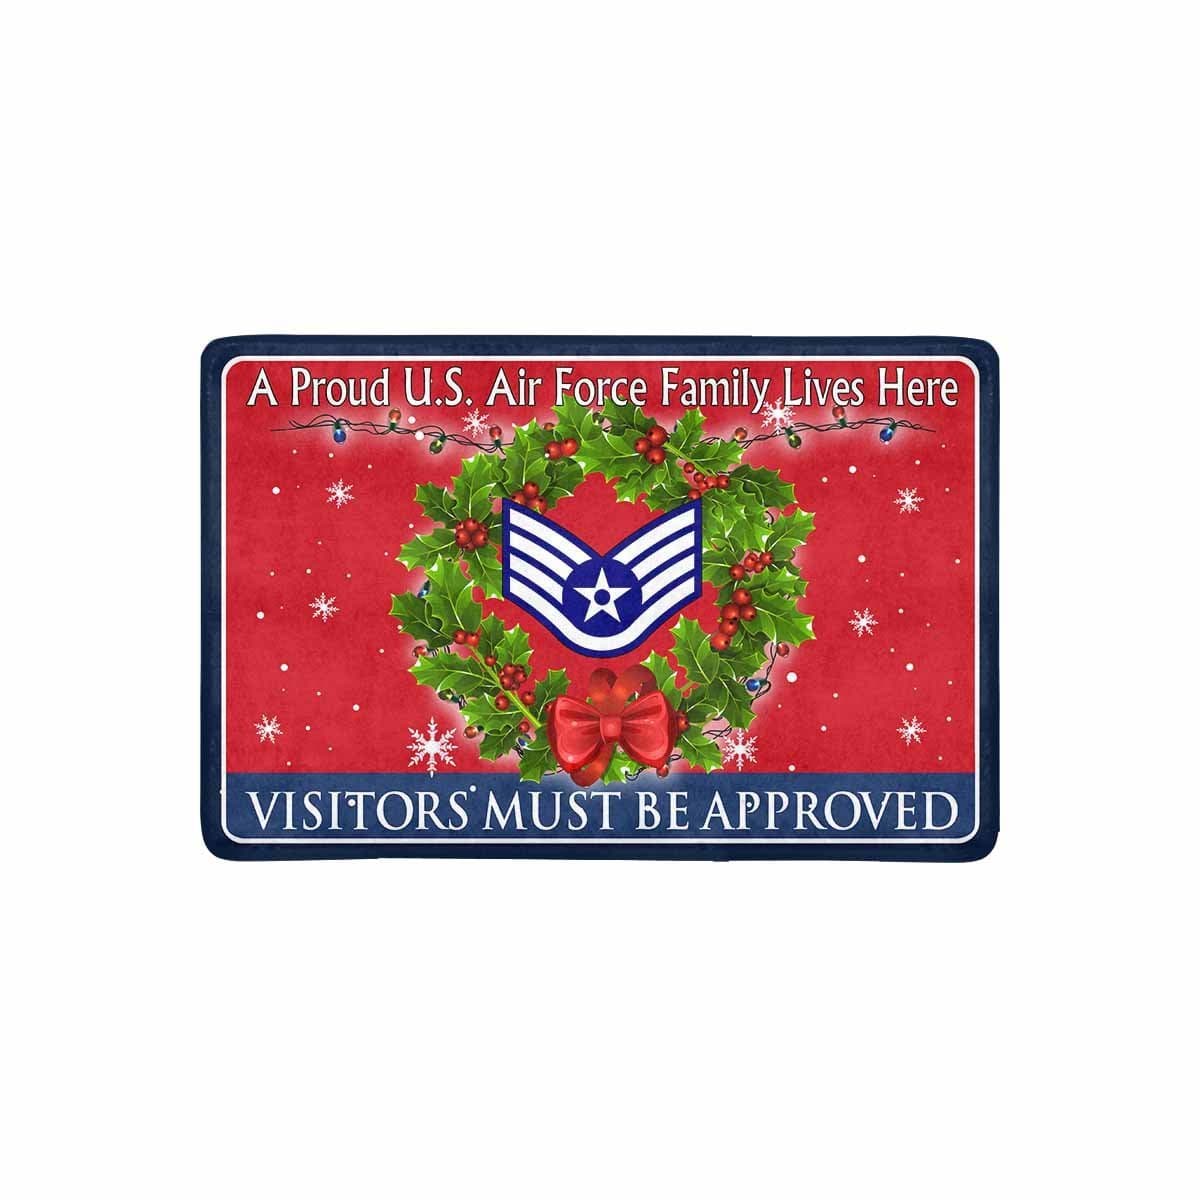 US Air Force E-5 Staff Sergeant SSgt E5 Noncommissioned Officer Ranks AF Rank - Visitors must be approved-Doormat-USAF-Ranks-Veterans Nation